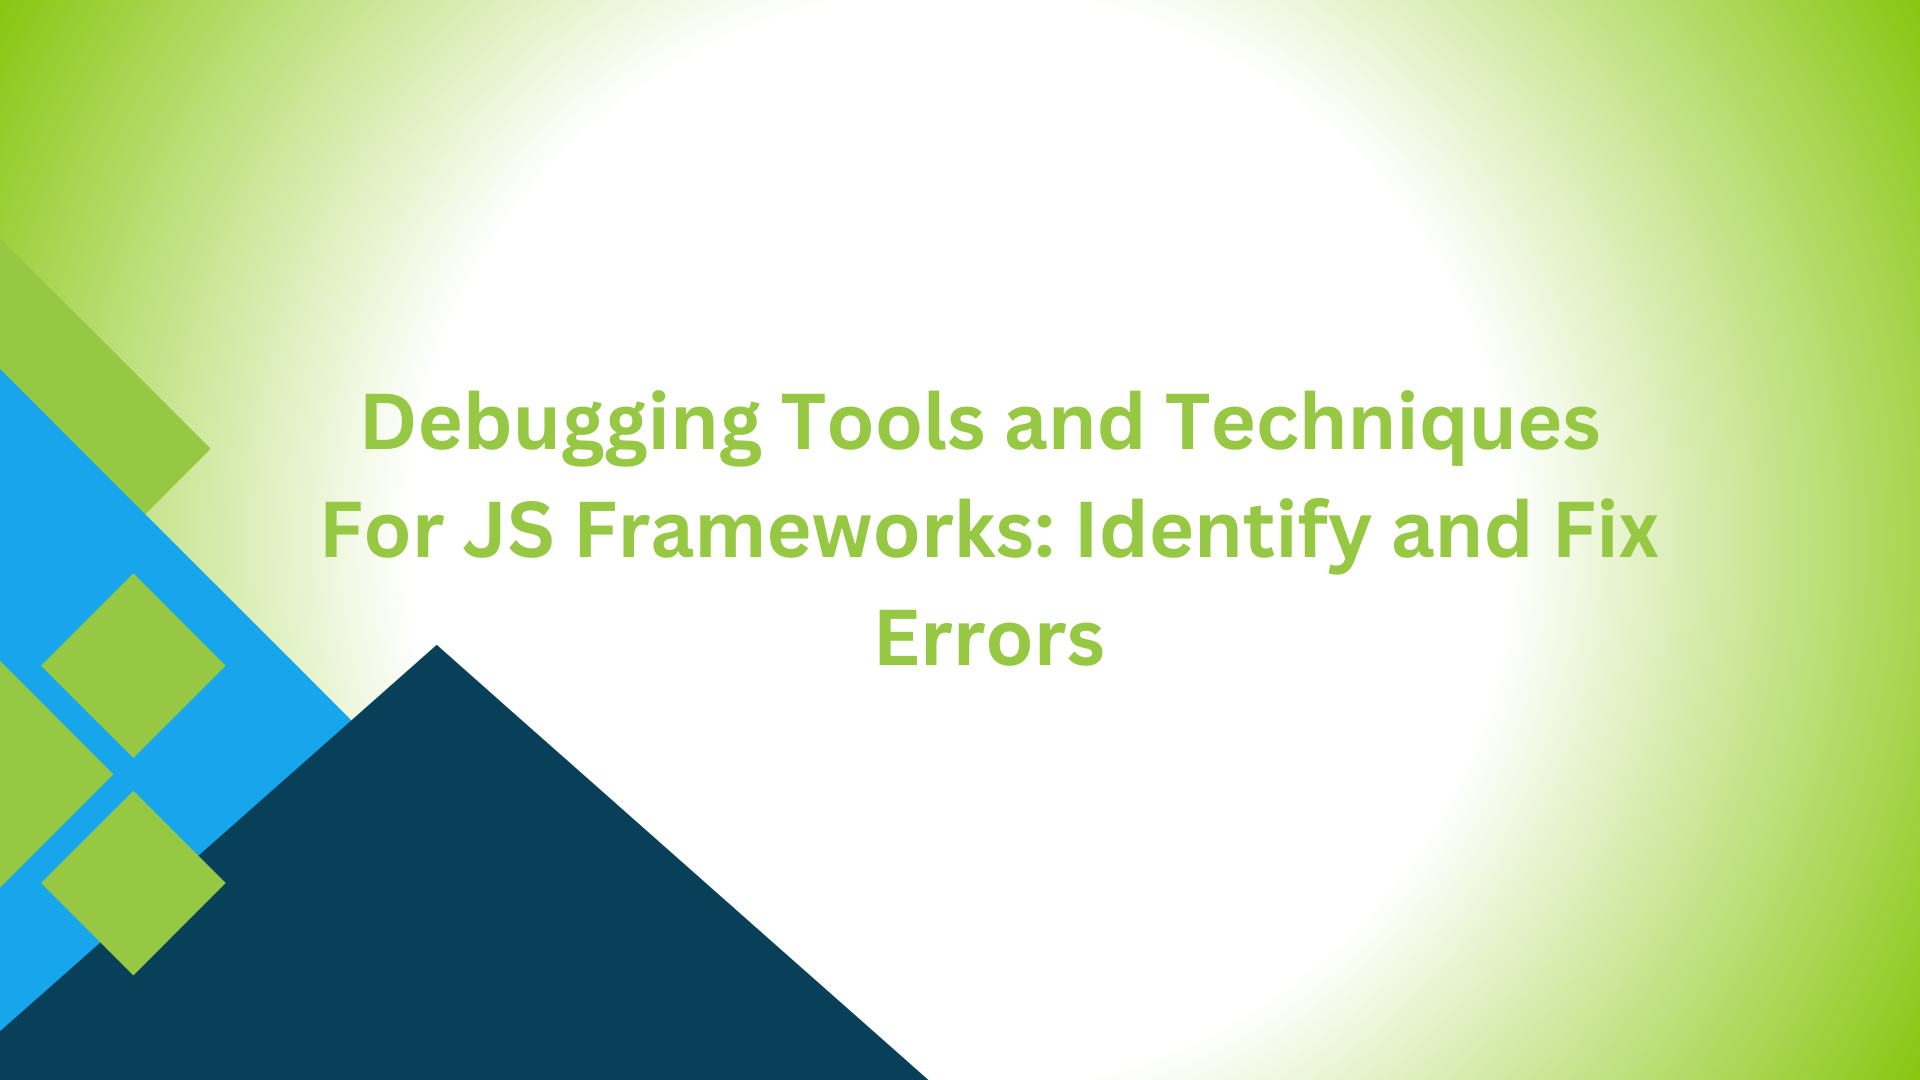 Debugging Tools and Techniques For JS Frameworks: Identify and Fix Errors in a most popular javascript framework